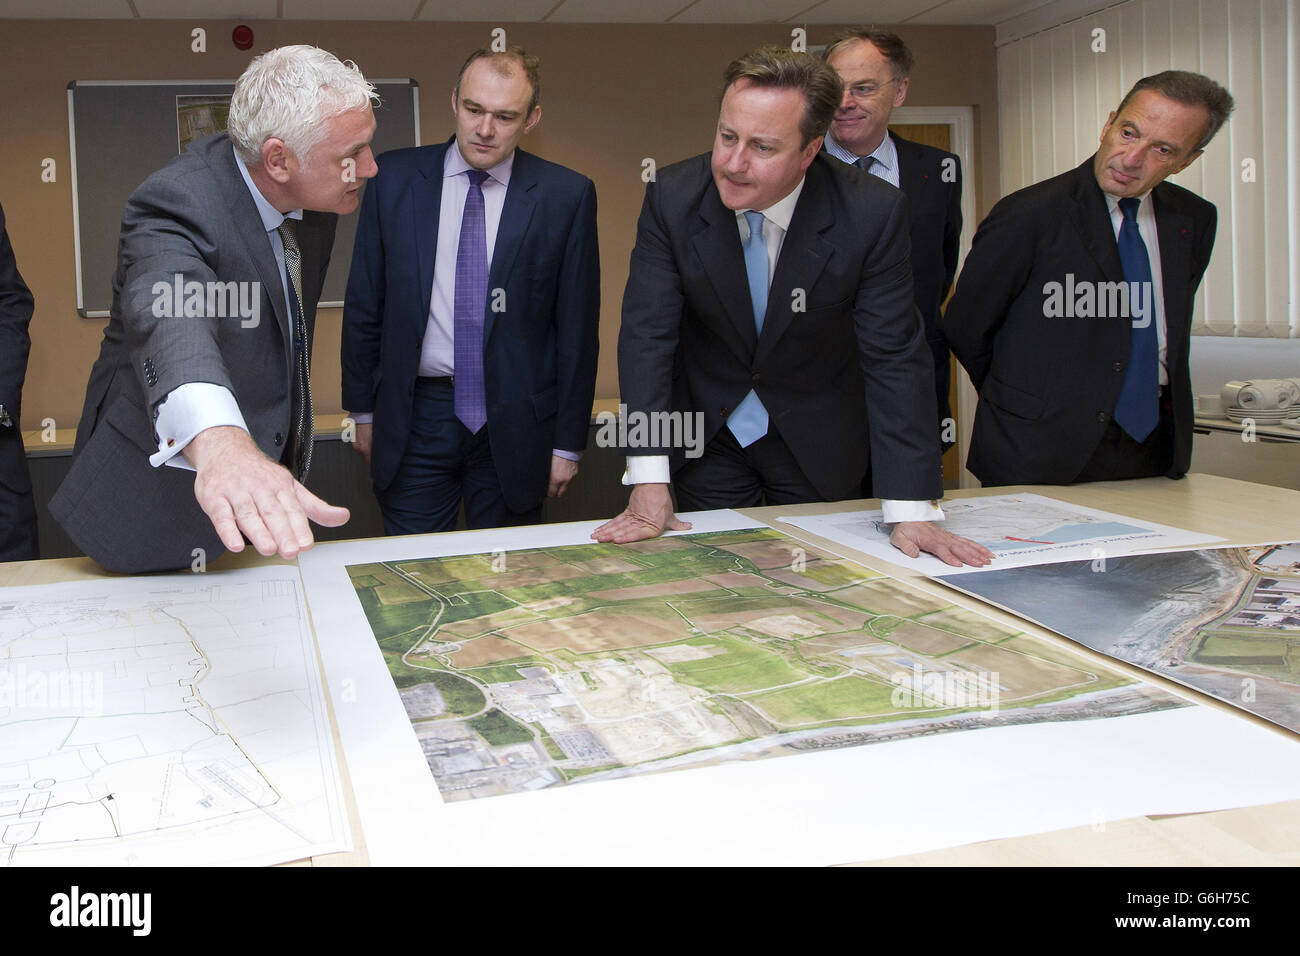 (left to right) Nigel Cann site director of Hinkley Point C, Energy Secretary Ed Davey, Prime Minister David Cameron, Vincent de Rivaz, Chief Executive of EDF (Electricite de France) and Henri Proglio, CEO and Chairman of EDF as they examine site plans for the news Hinkly C nuclear power station at Hinkley Point, Somerset. Britain's first new nuclear power station in a generation is to be built under the &Acirc;&pound;16 billion project which will create thousands of new jobs. Stock Photo